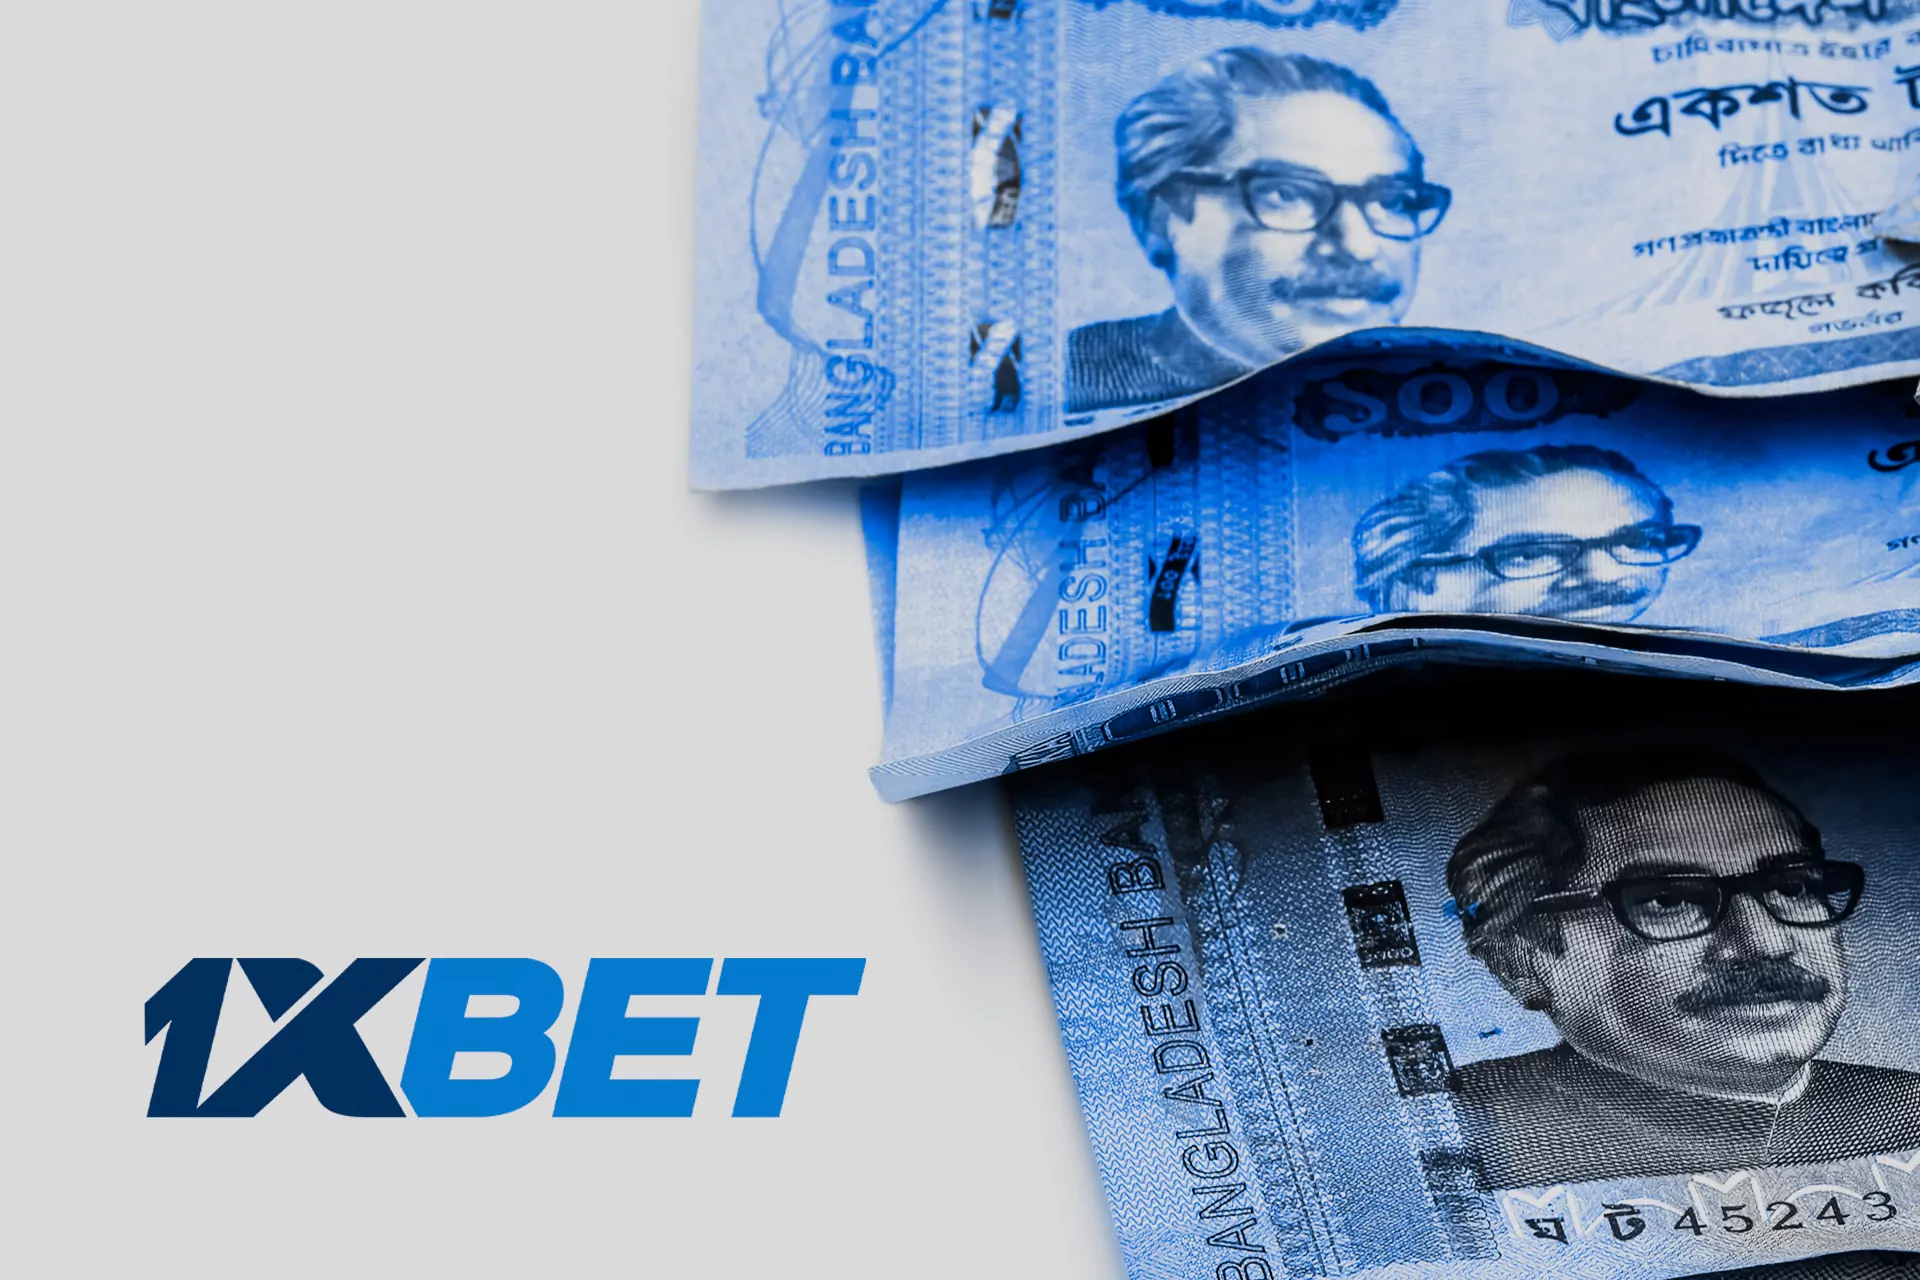 1xbet accepts transfers from all the most popular payment systems.